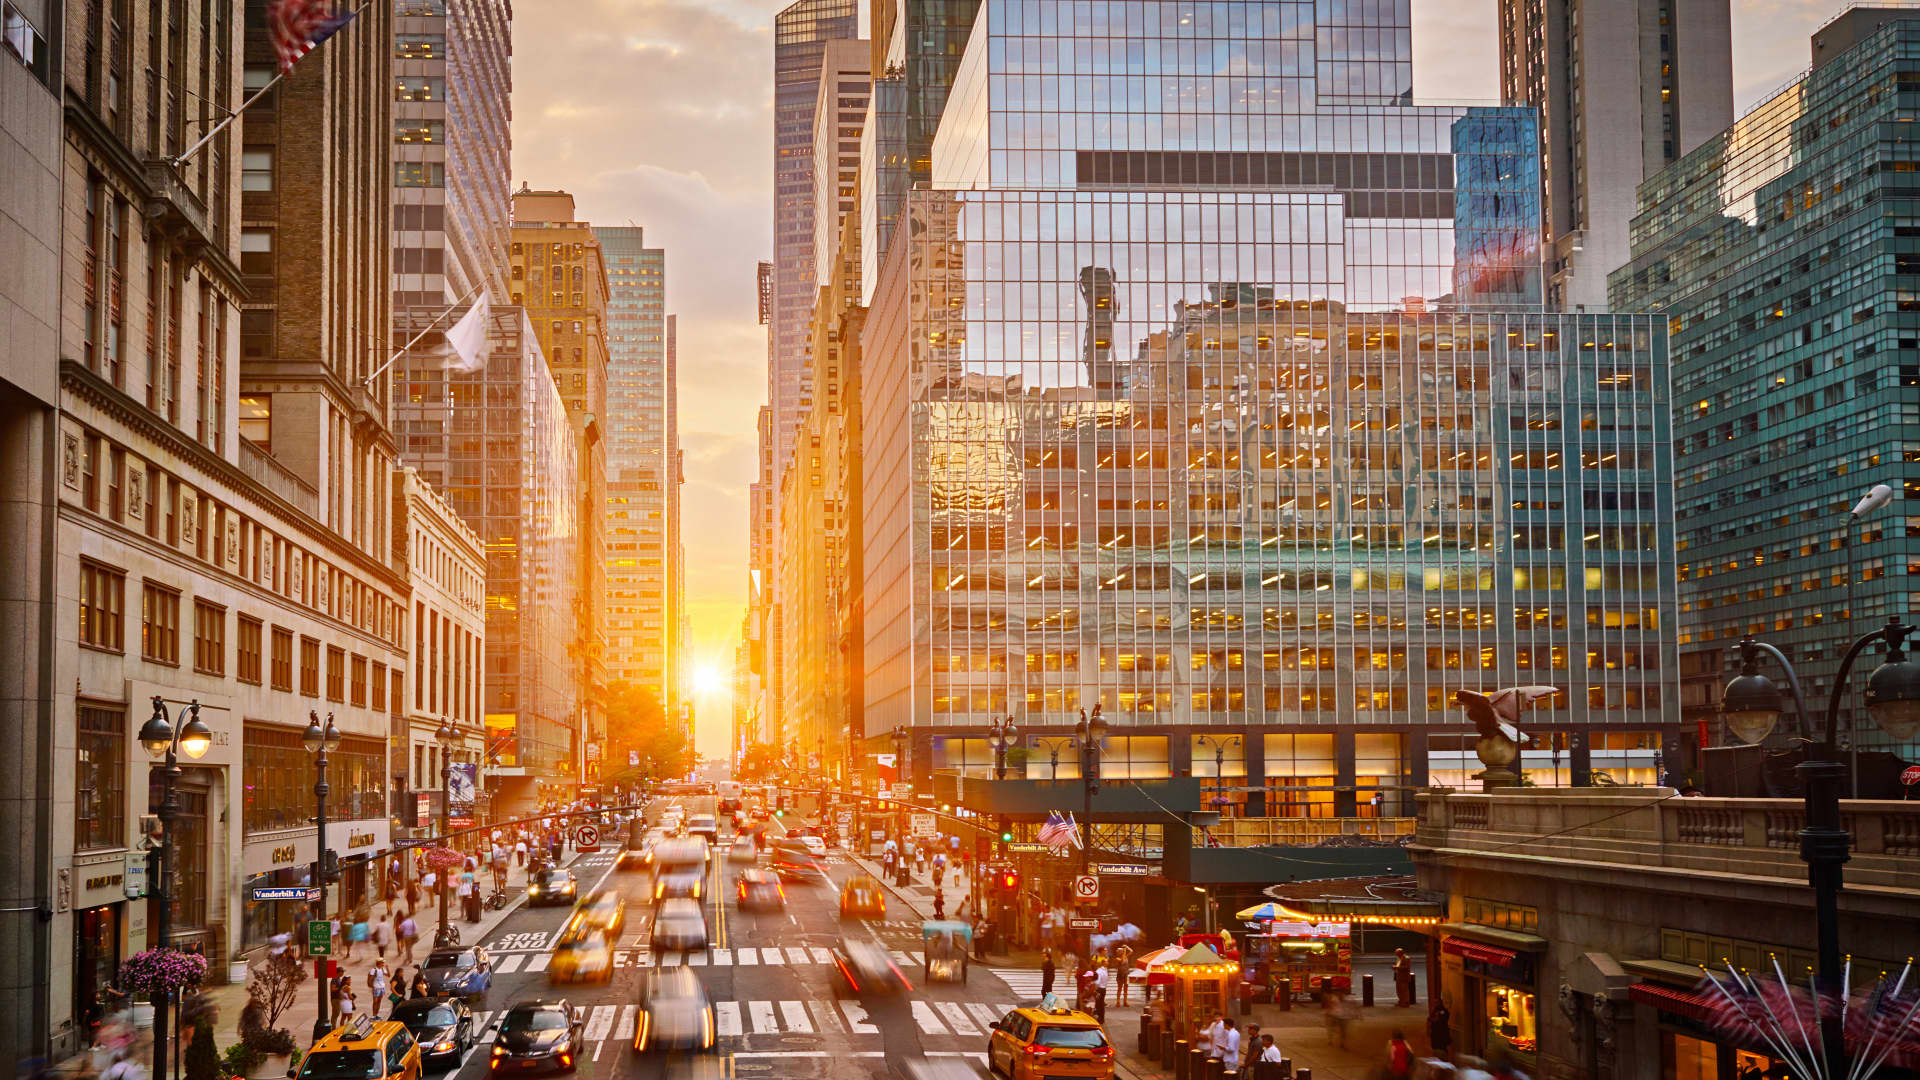 The Manhattanhenge ranked as the top must-see travel experience, according to Google data collected by Kuoni.